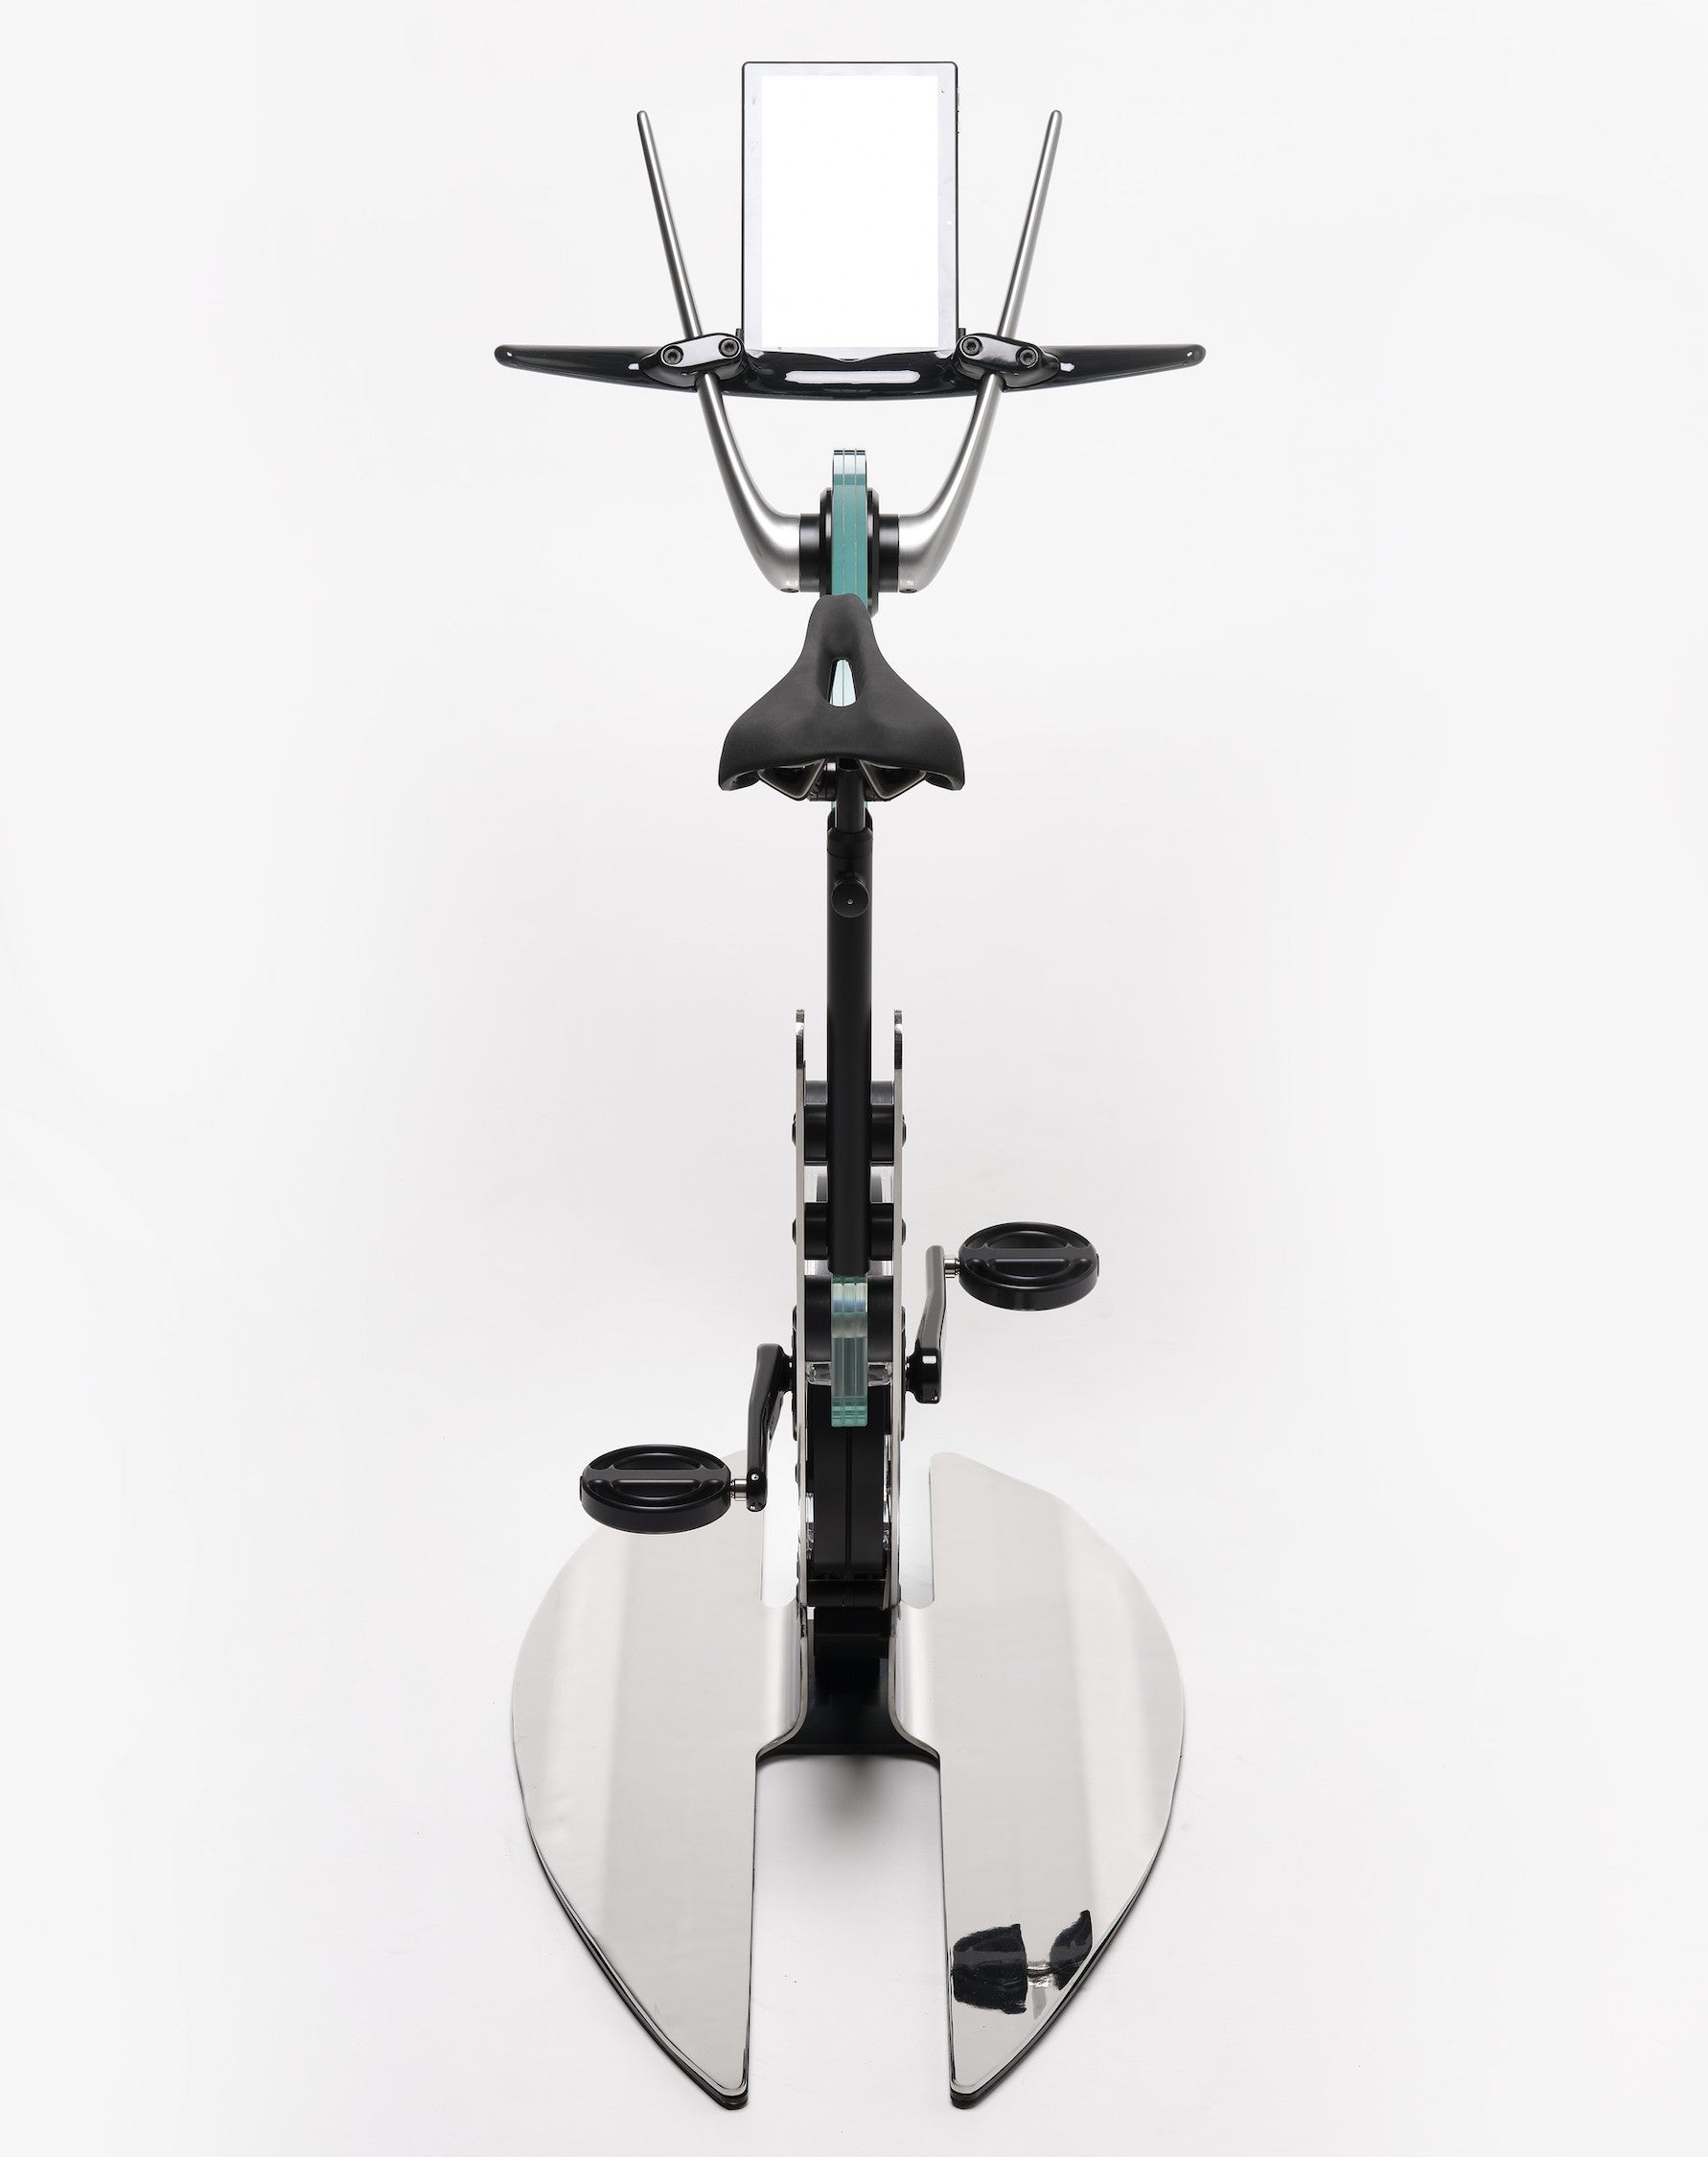 Luxury Home Gym Equipment - Ciclotte Teckell Glass indoor Bike by Cycling Bears.